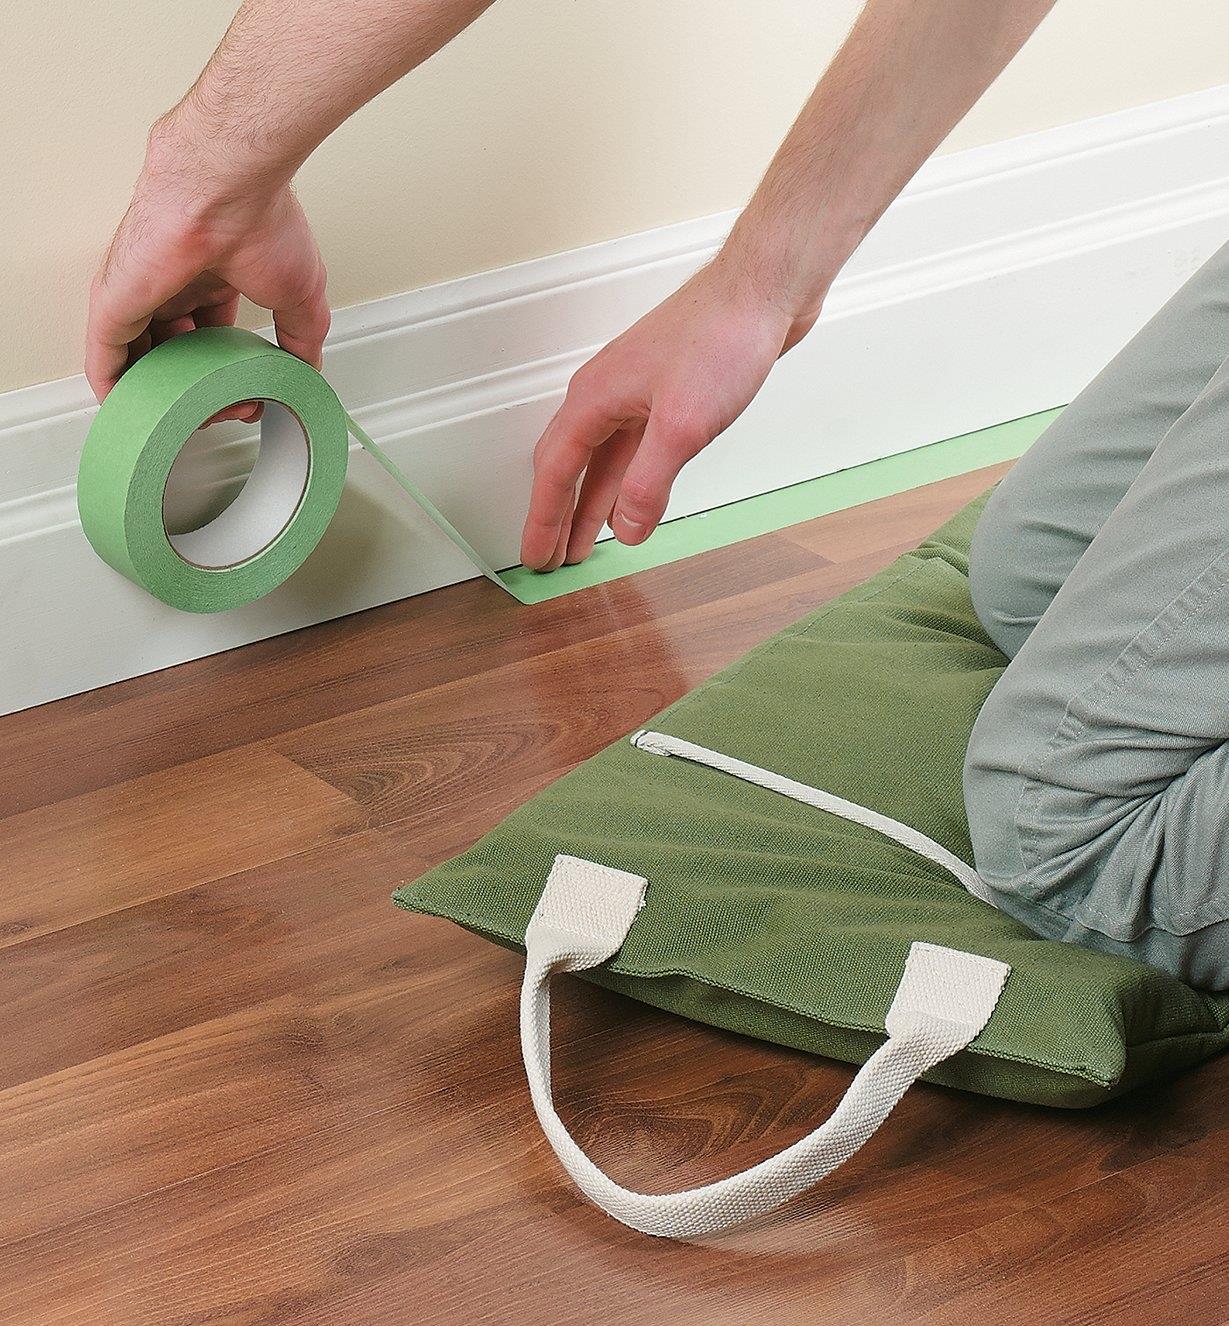 Kneeling on the Portable Canvas Utility Cushion while applying painter's tape to a floor